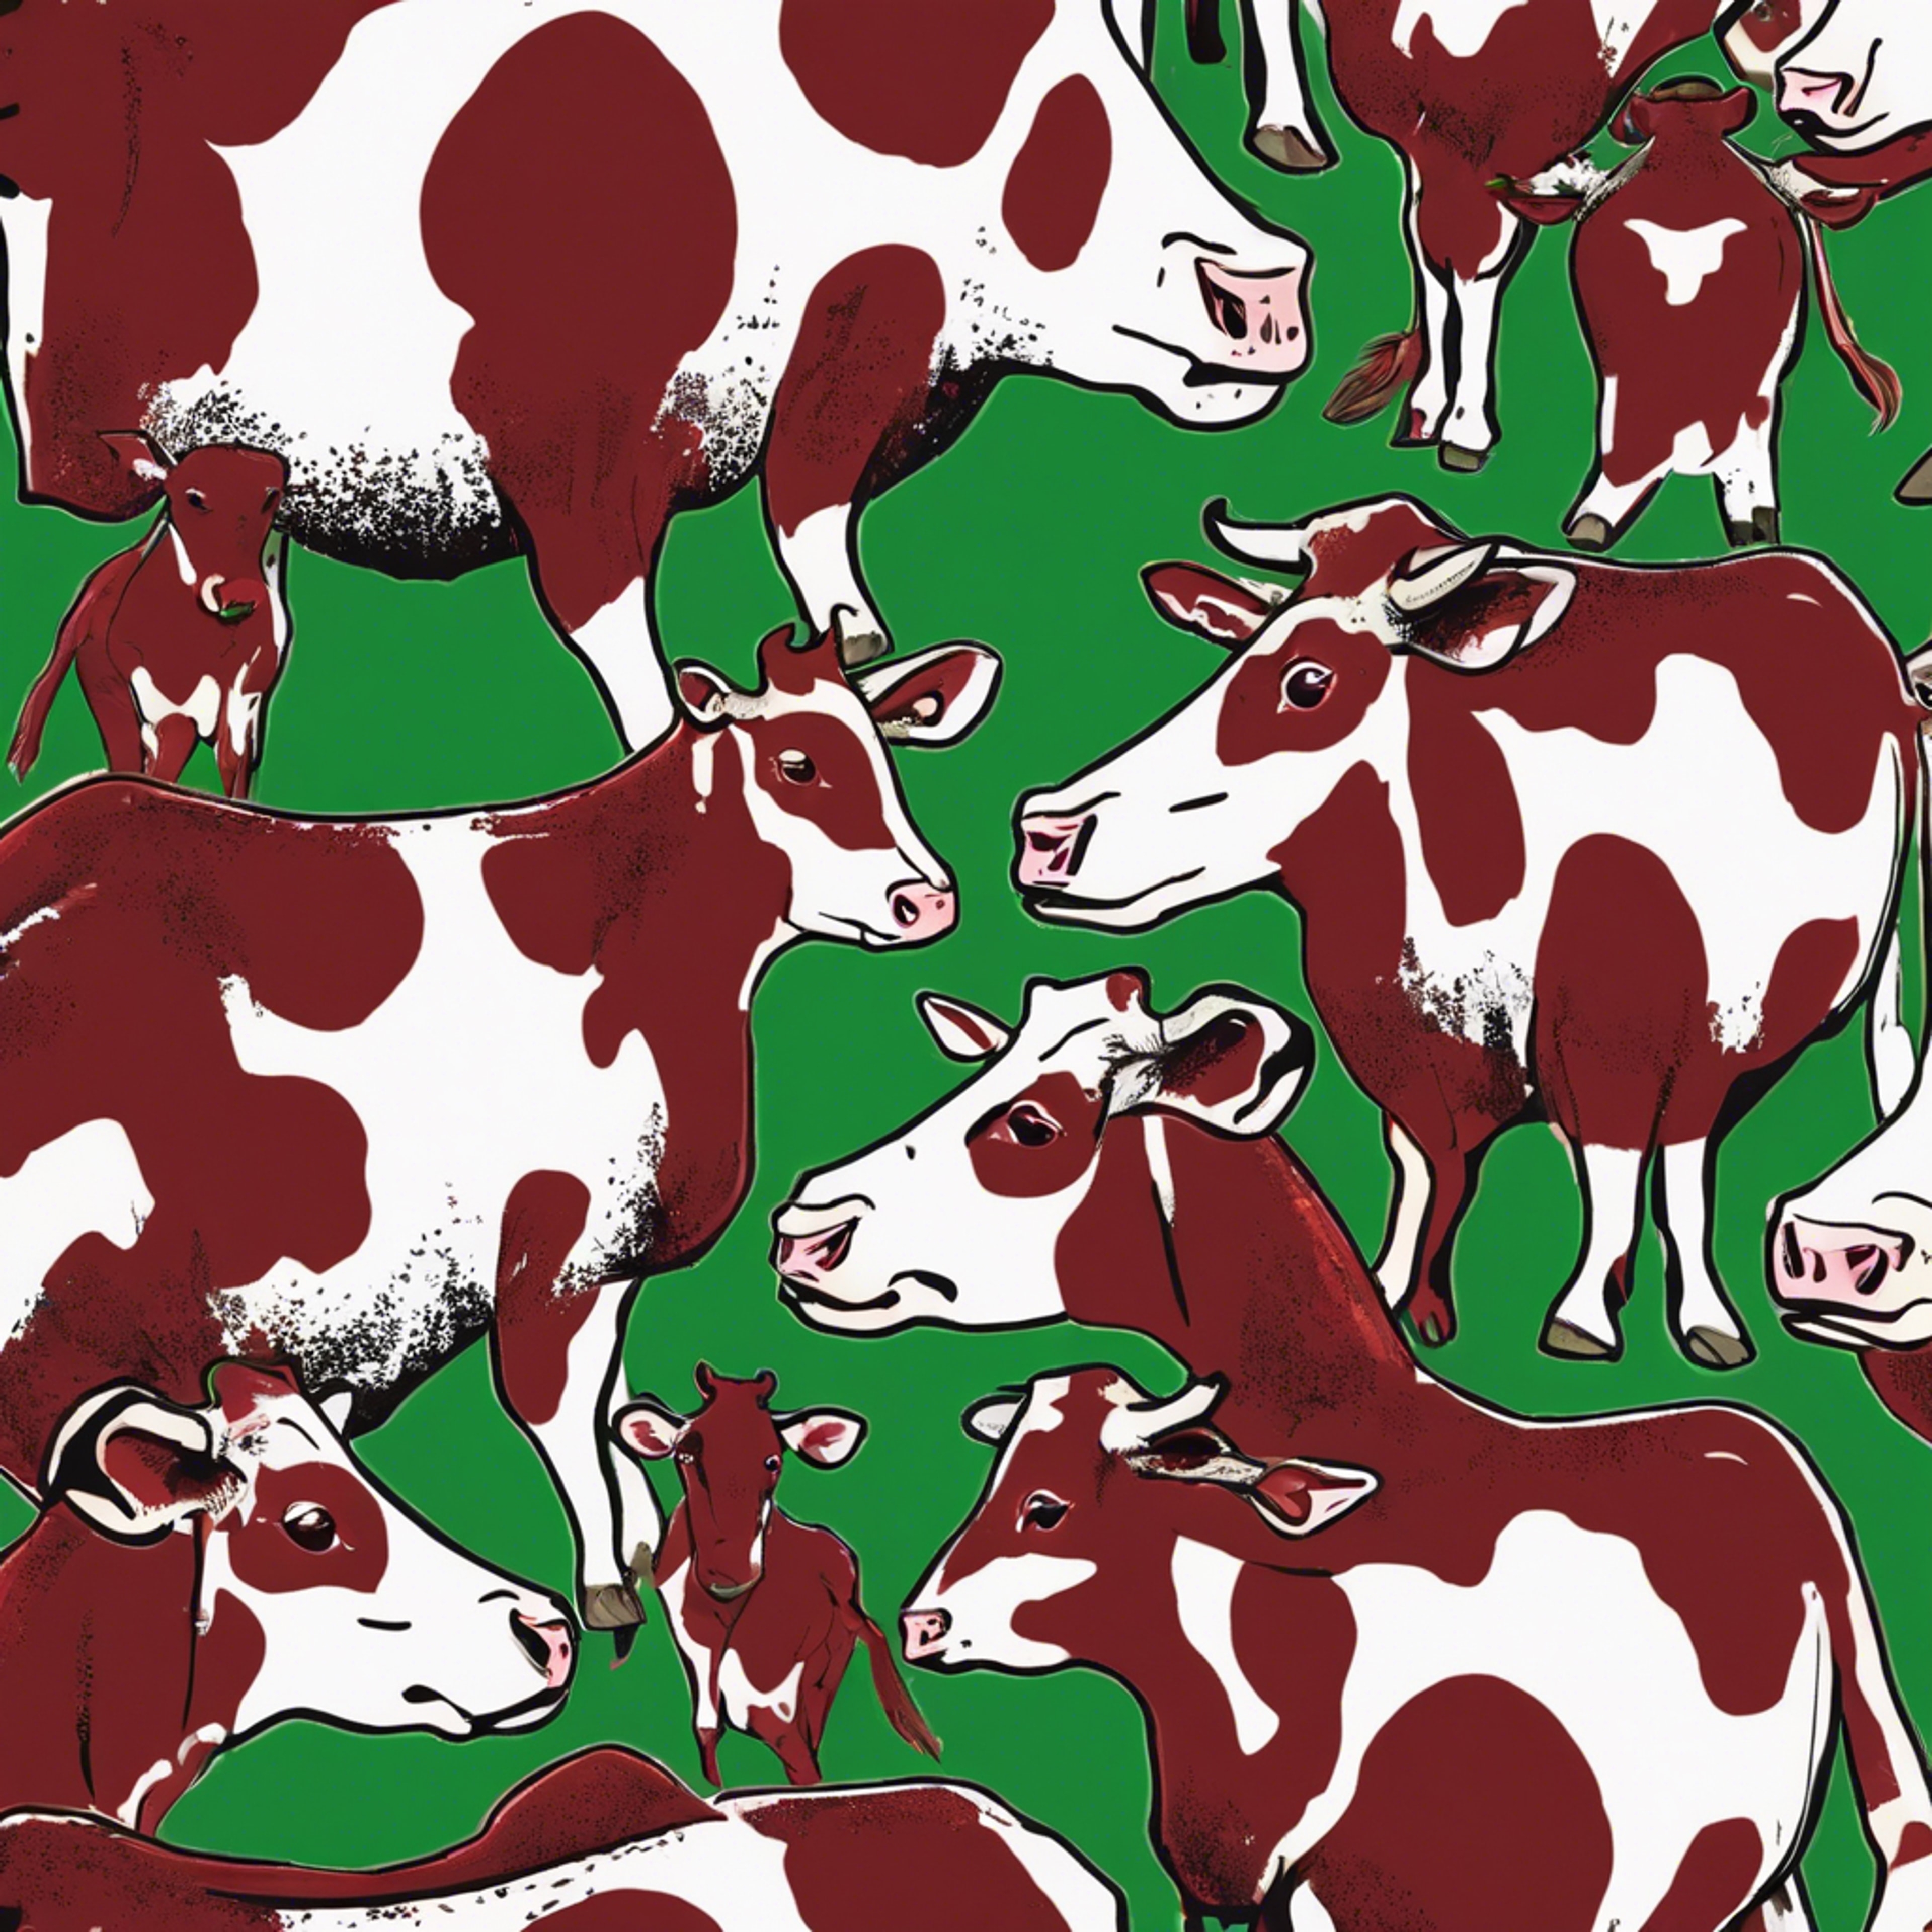 Cow spots in a mixed arrangement of rich red and fresh green. Tapéta[f1cd1f055c9d420f9ac5]